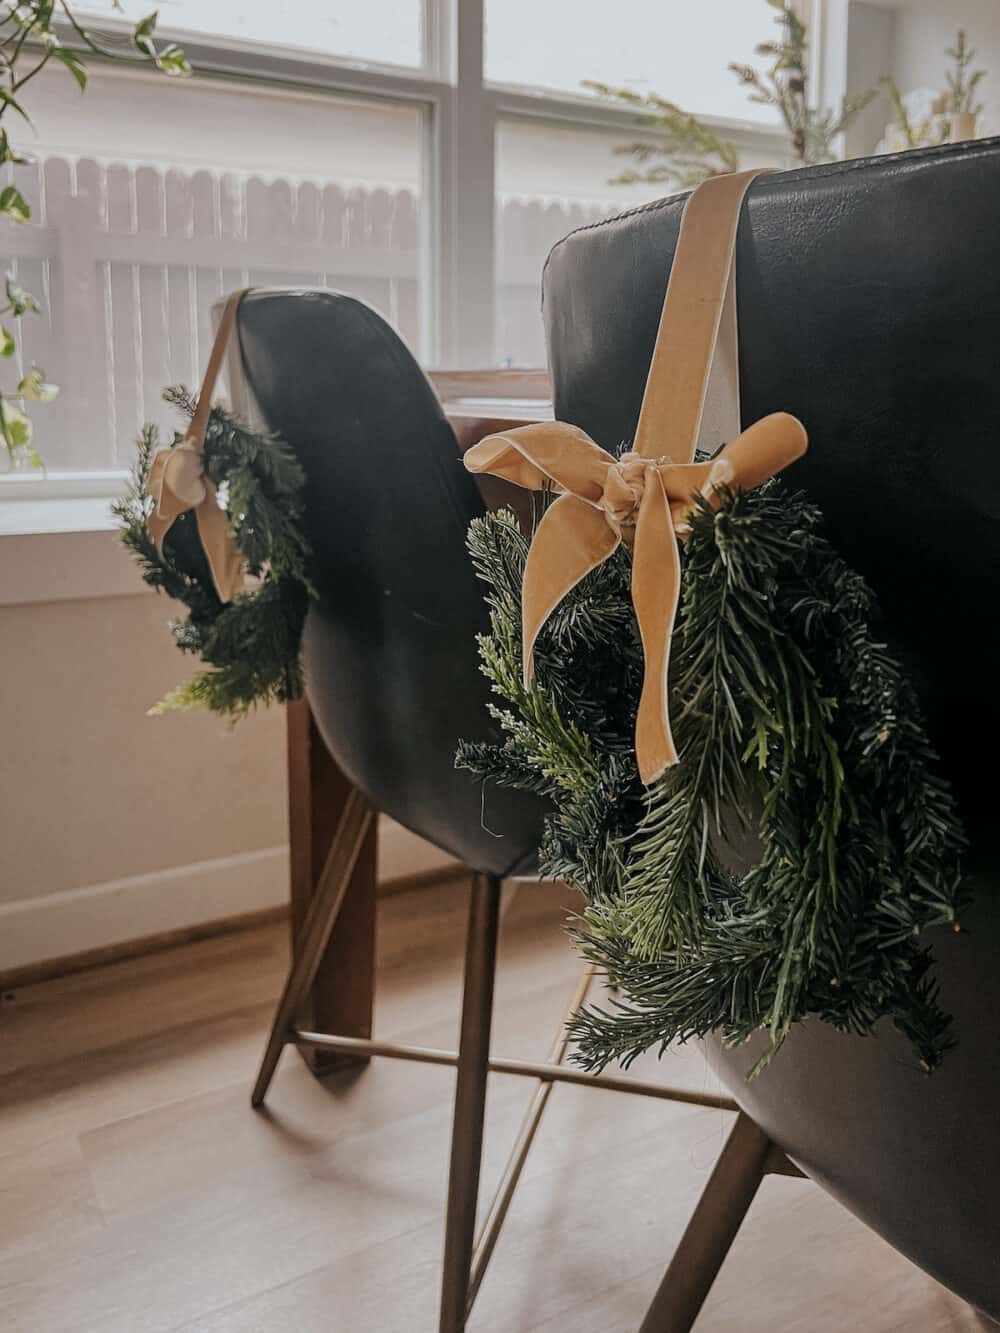 Small wreaths on a chair for the holidays